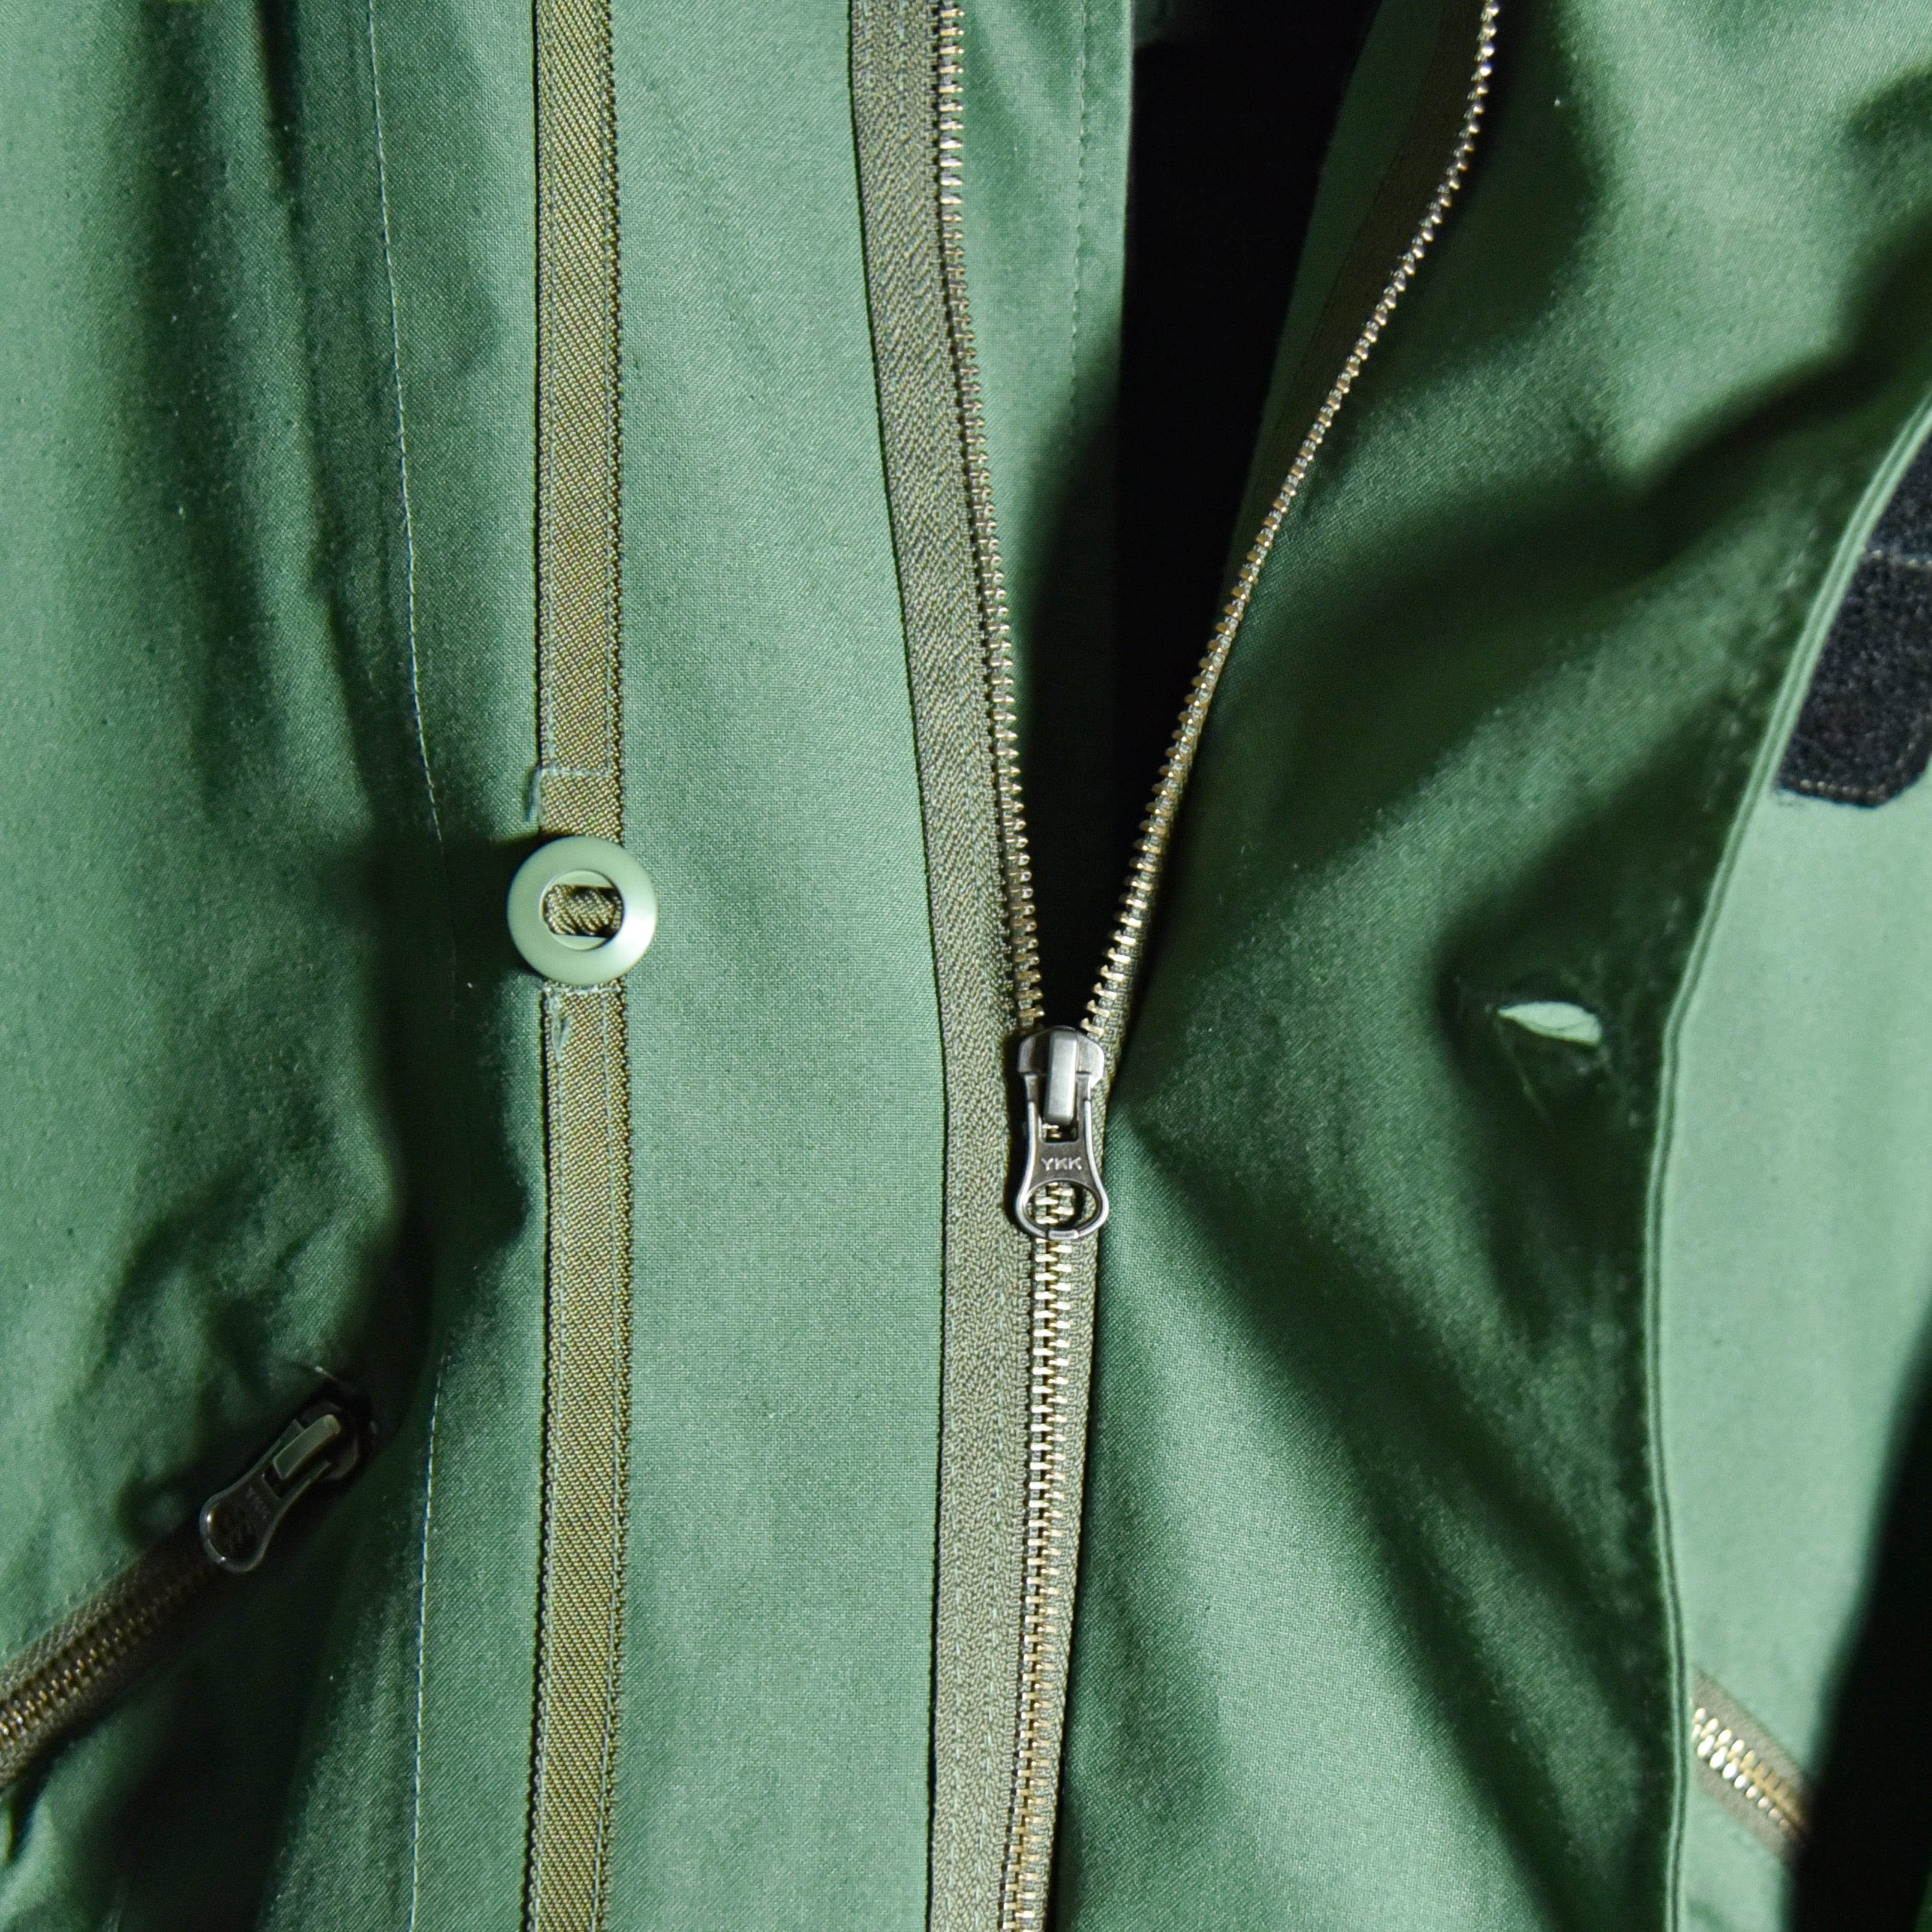 DEAD STOCK】Royal Air Force GORE-TEX MK4 Flyght Jacket イギリス軍